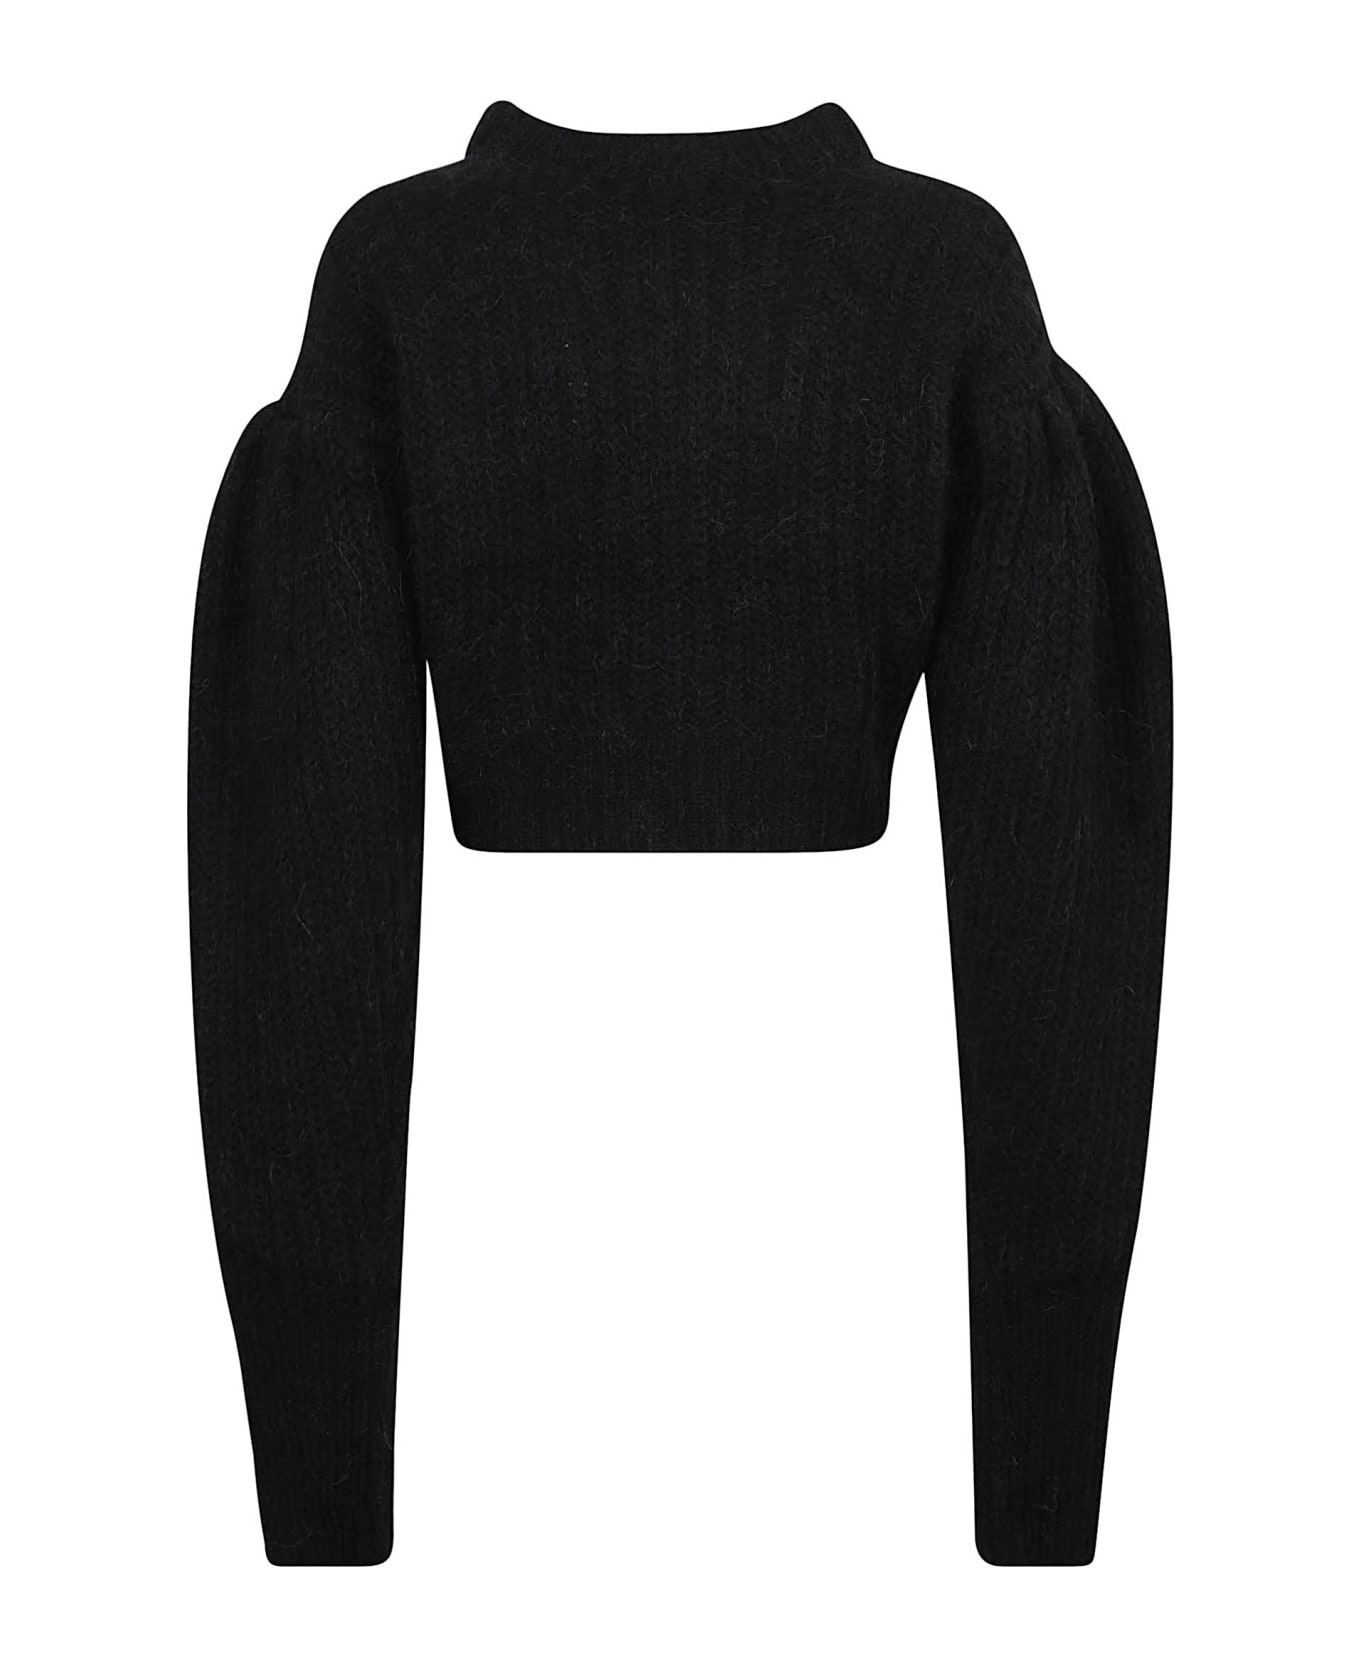 Rotate by Birger Christensen Knitted Sweater - Black